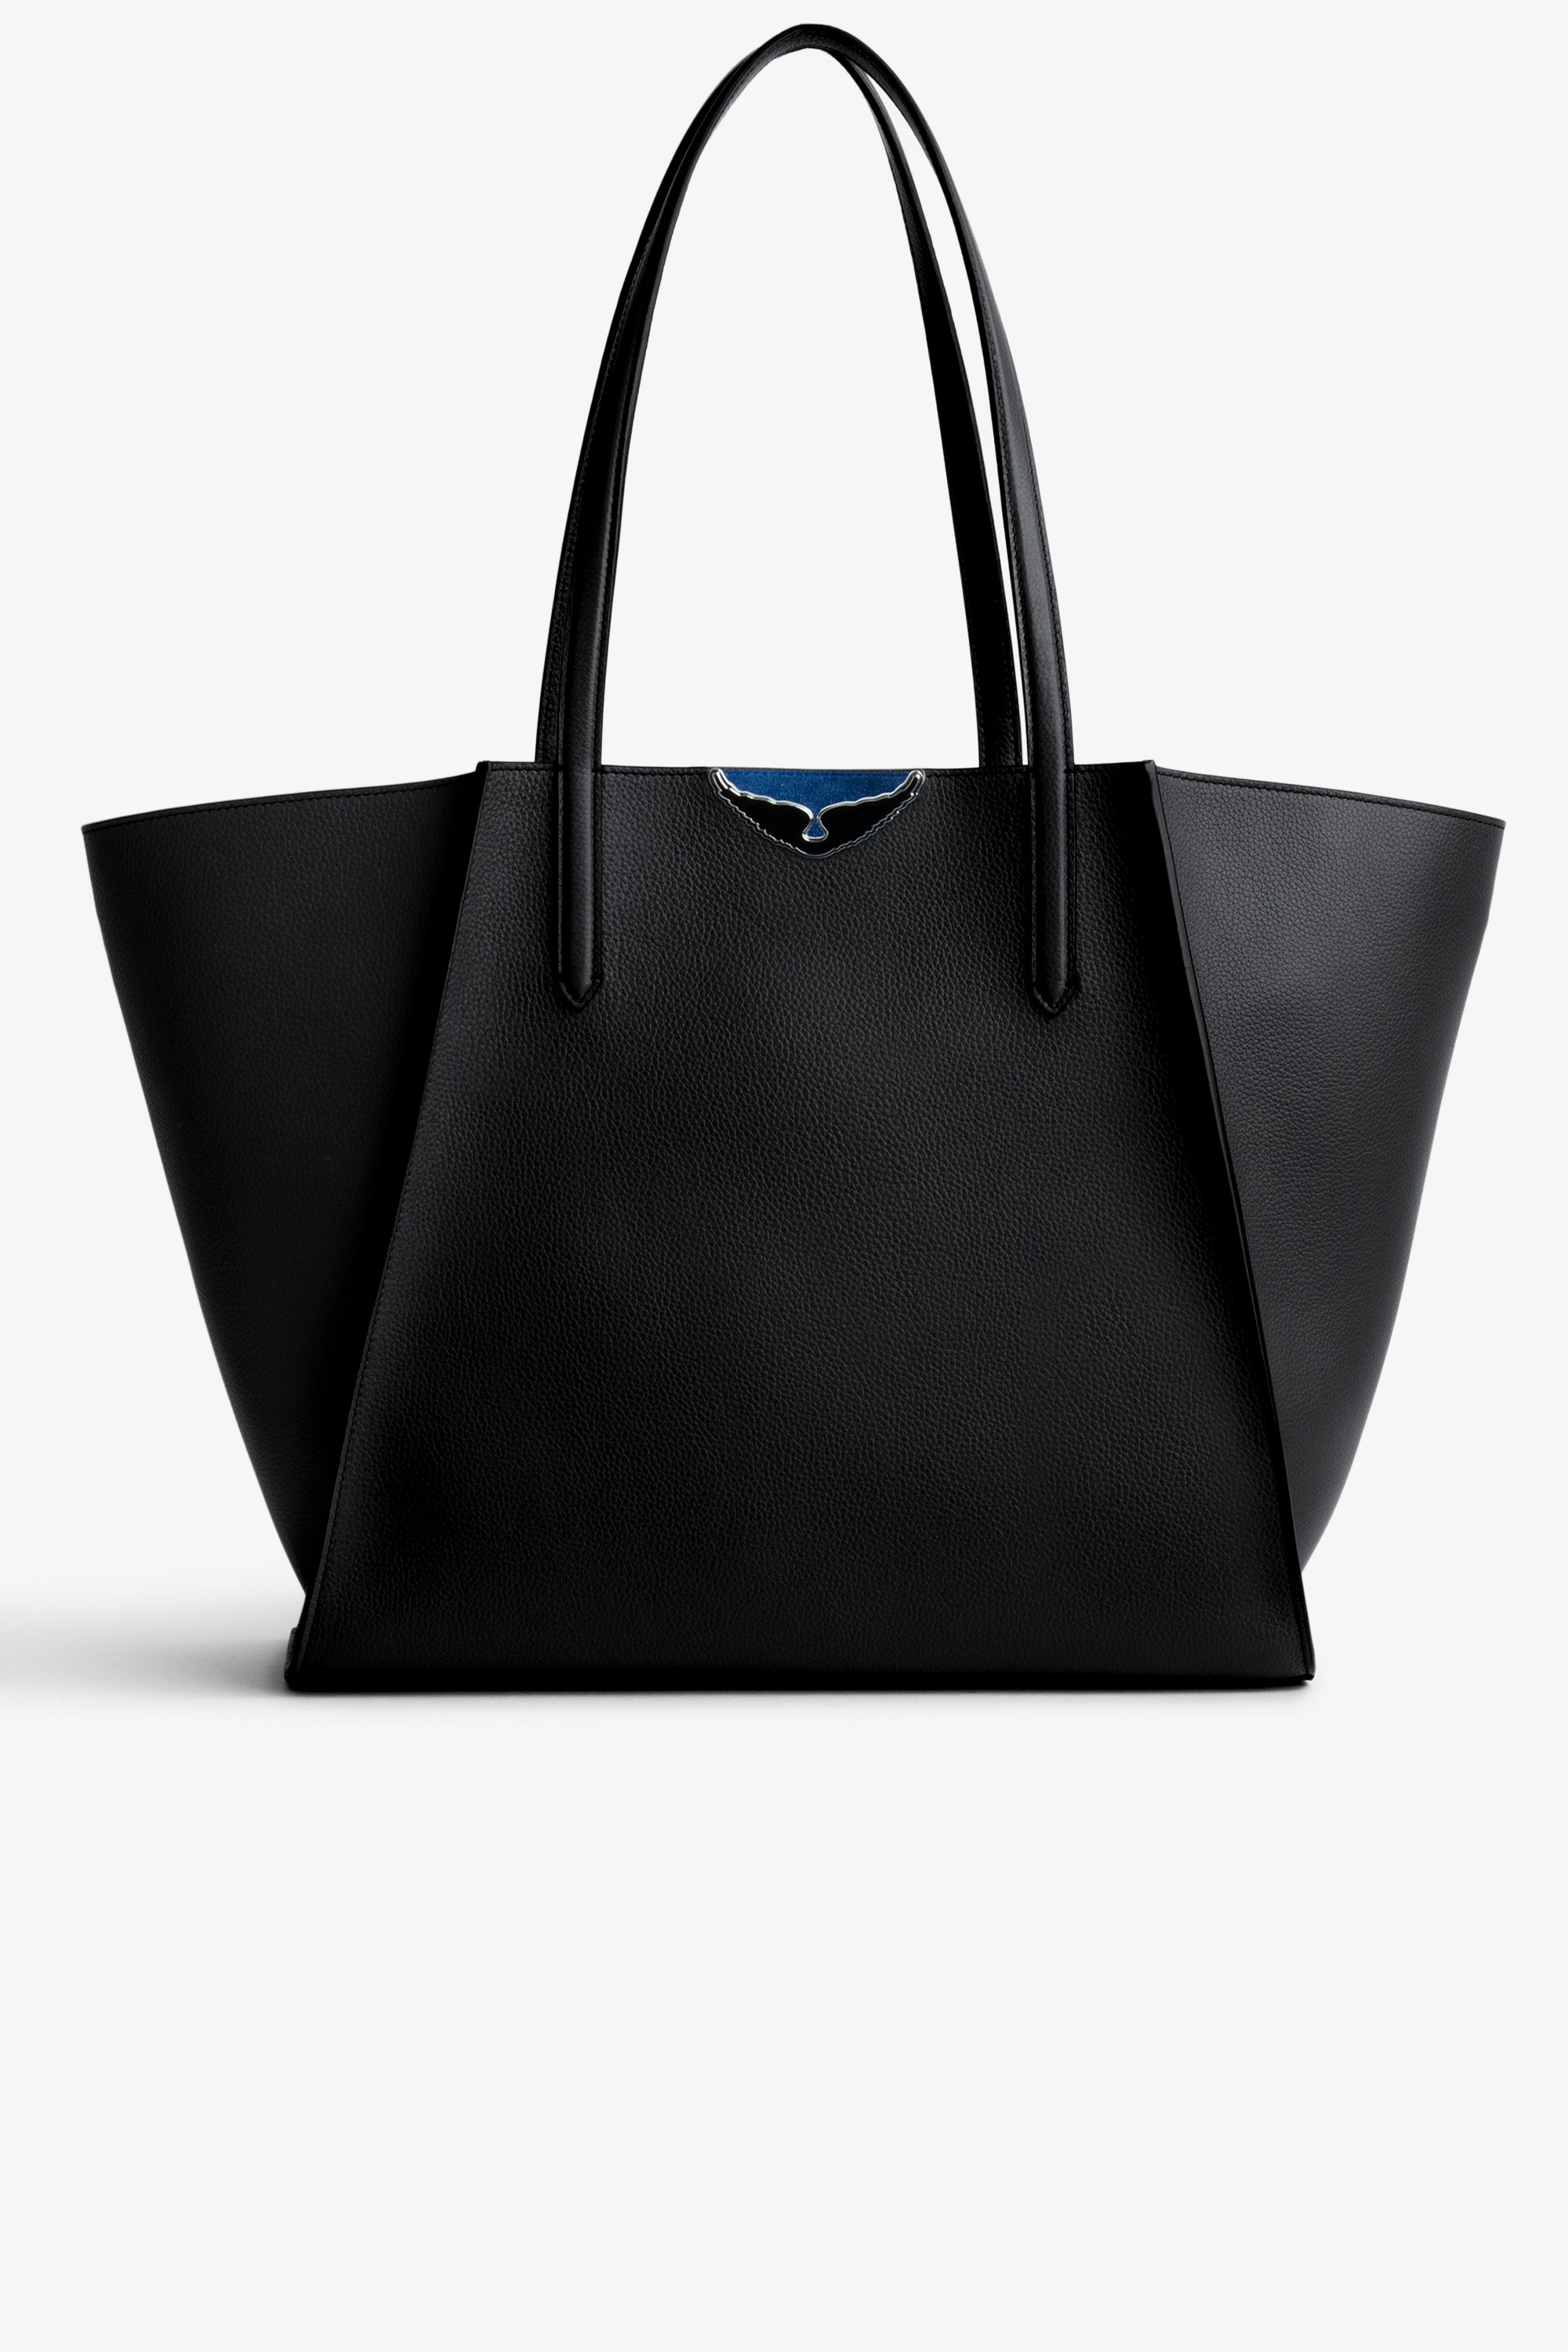 Le Borderline Bag - Women’s reversible tote bag in black grained leather and blue suede with black lacquered wings